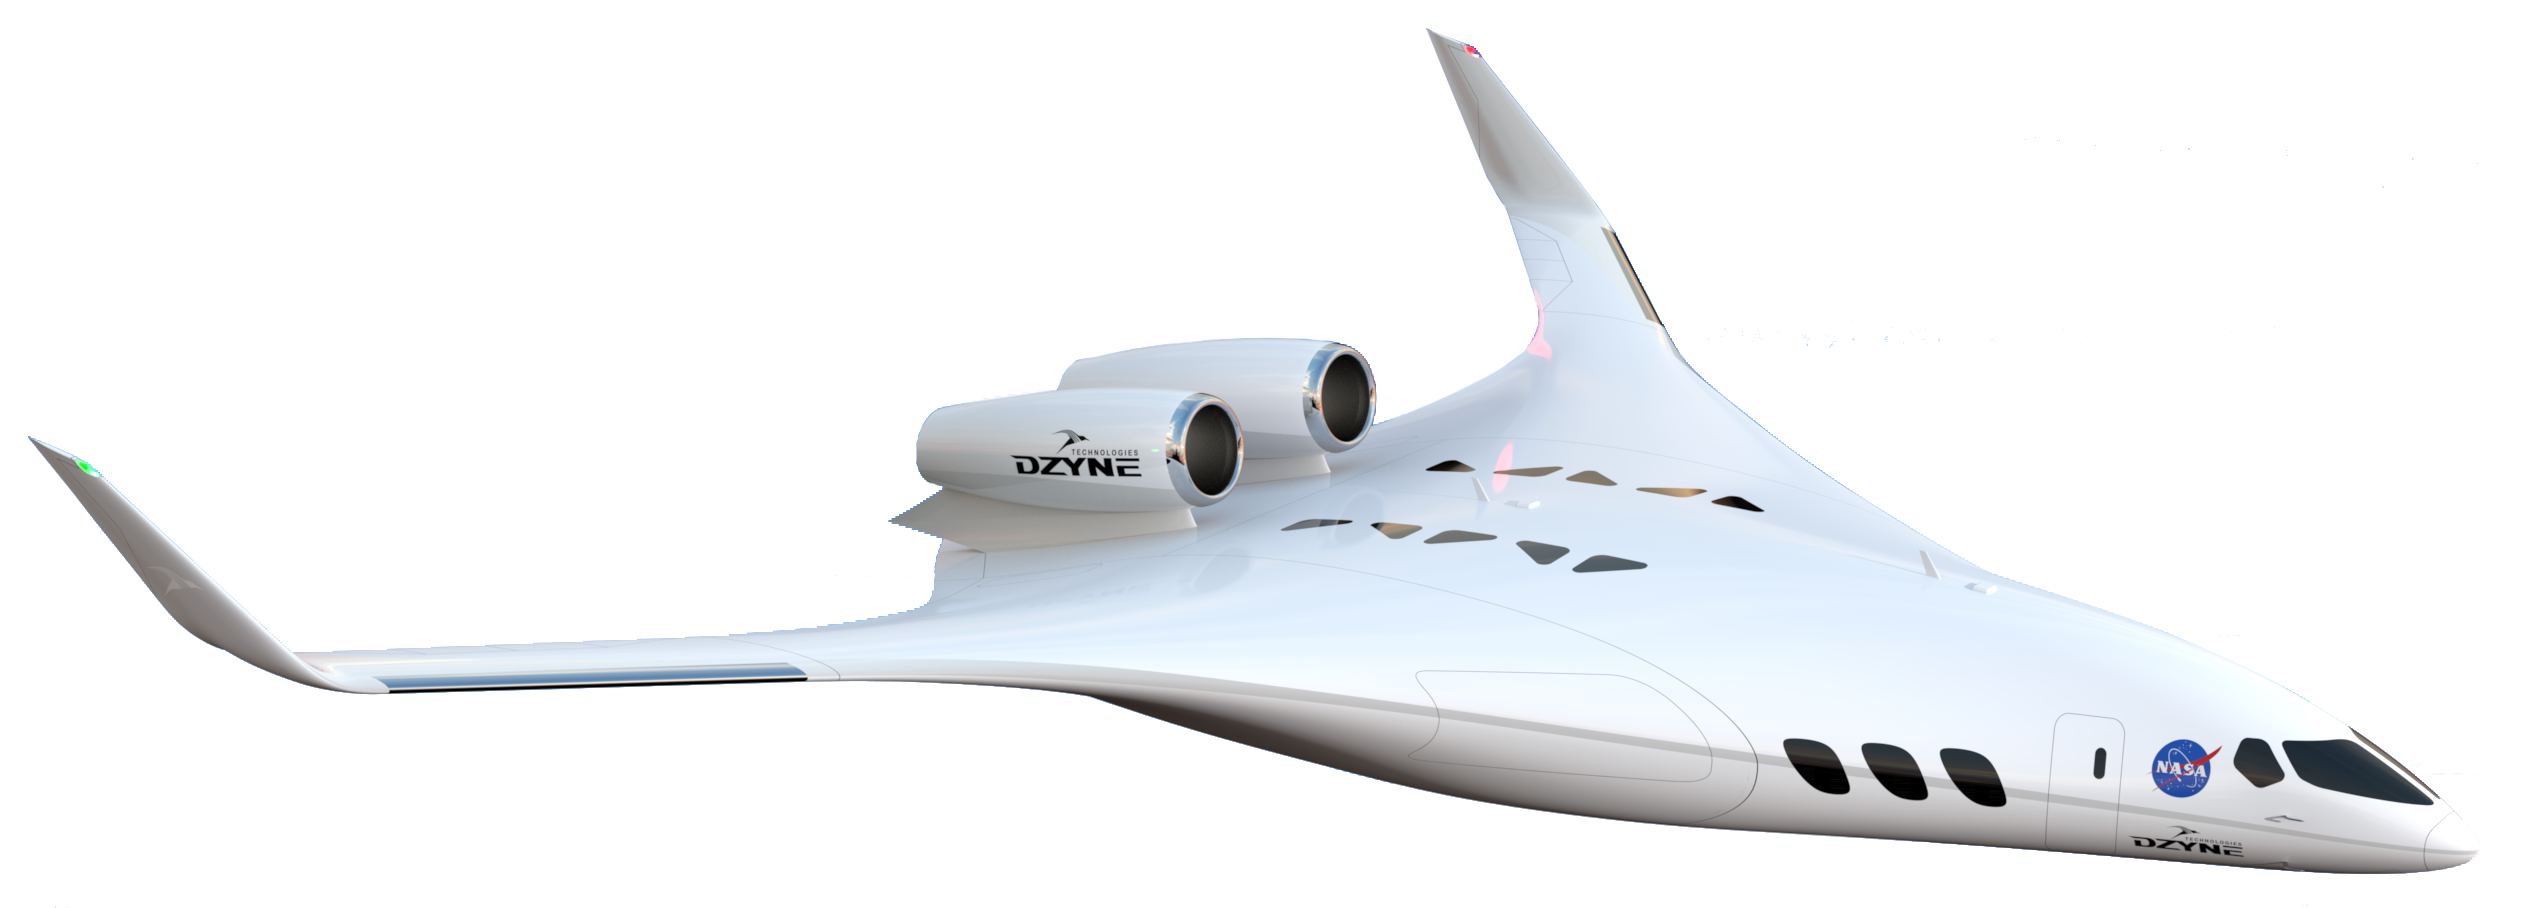 Artist concept of the Dzyne blended wing body (BWB)